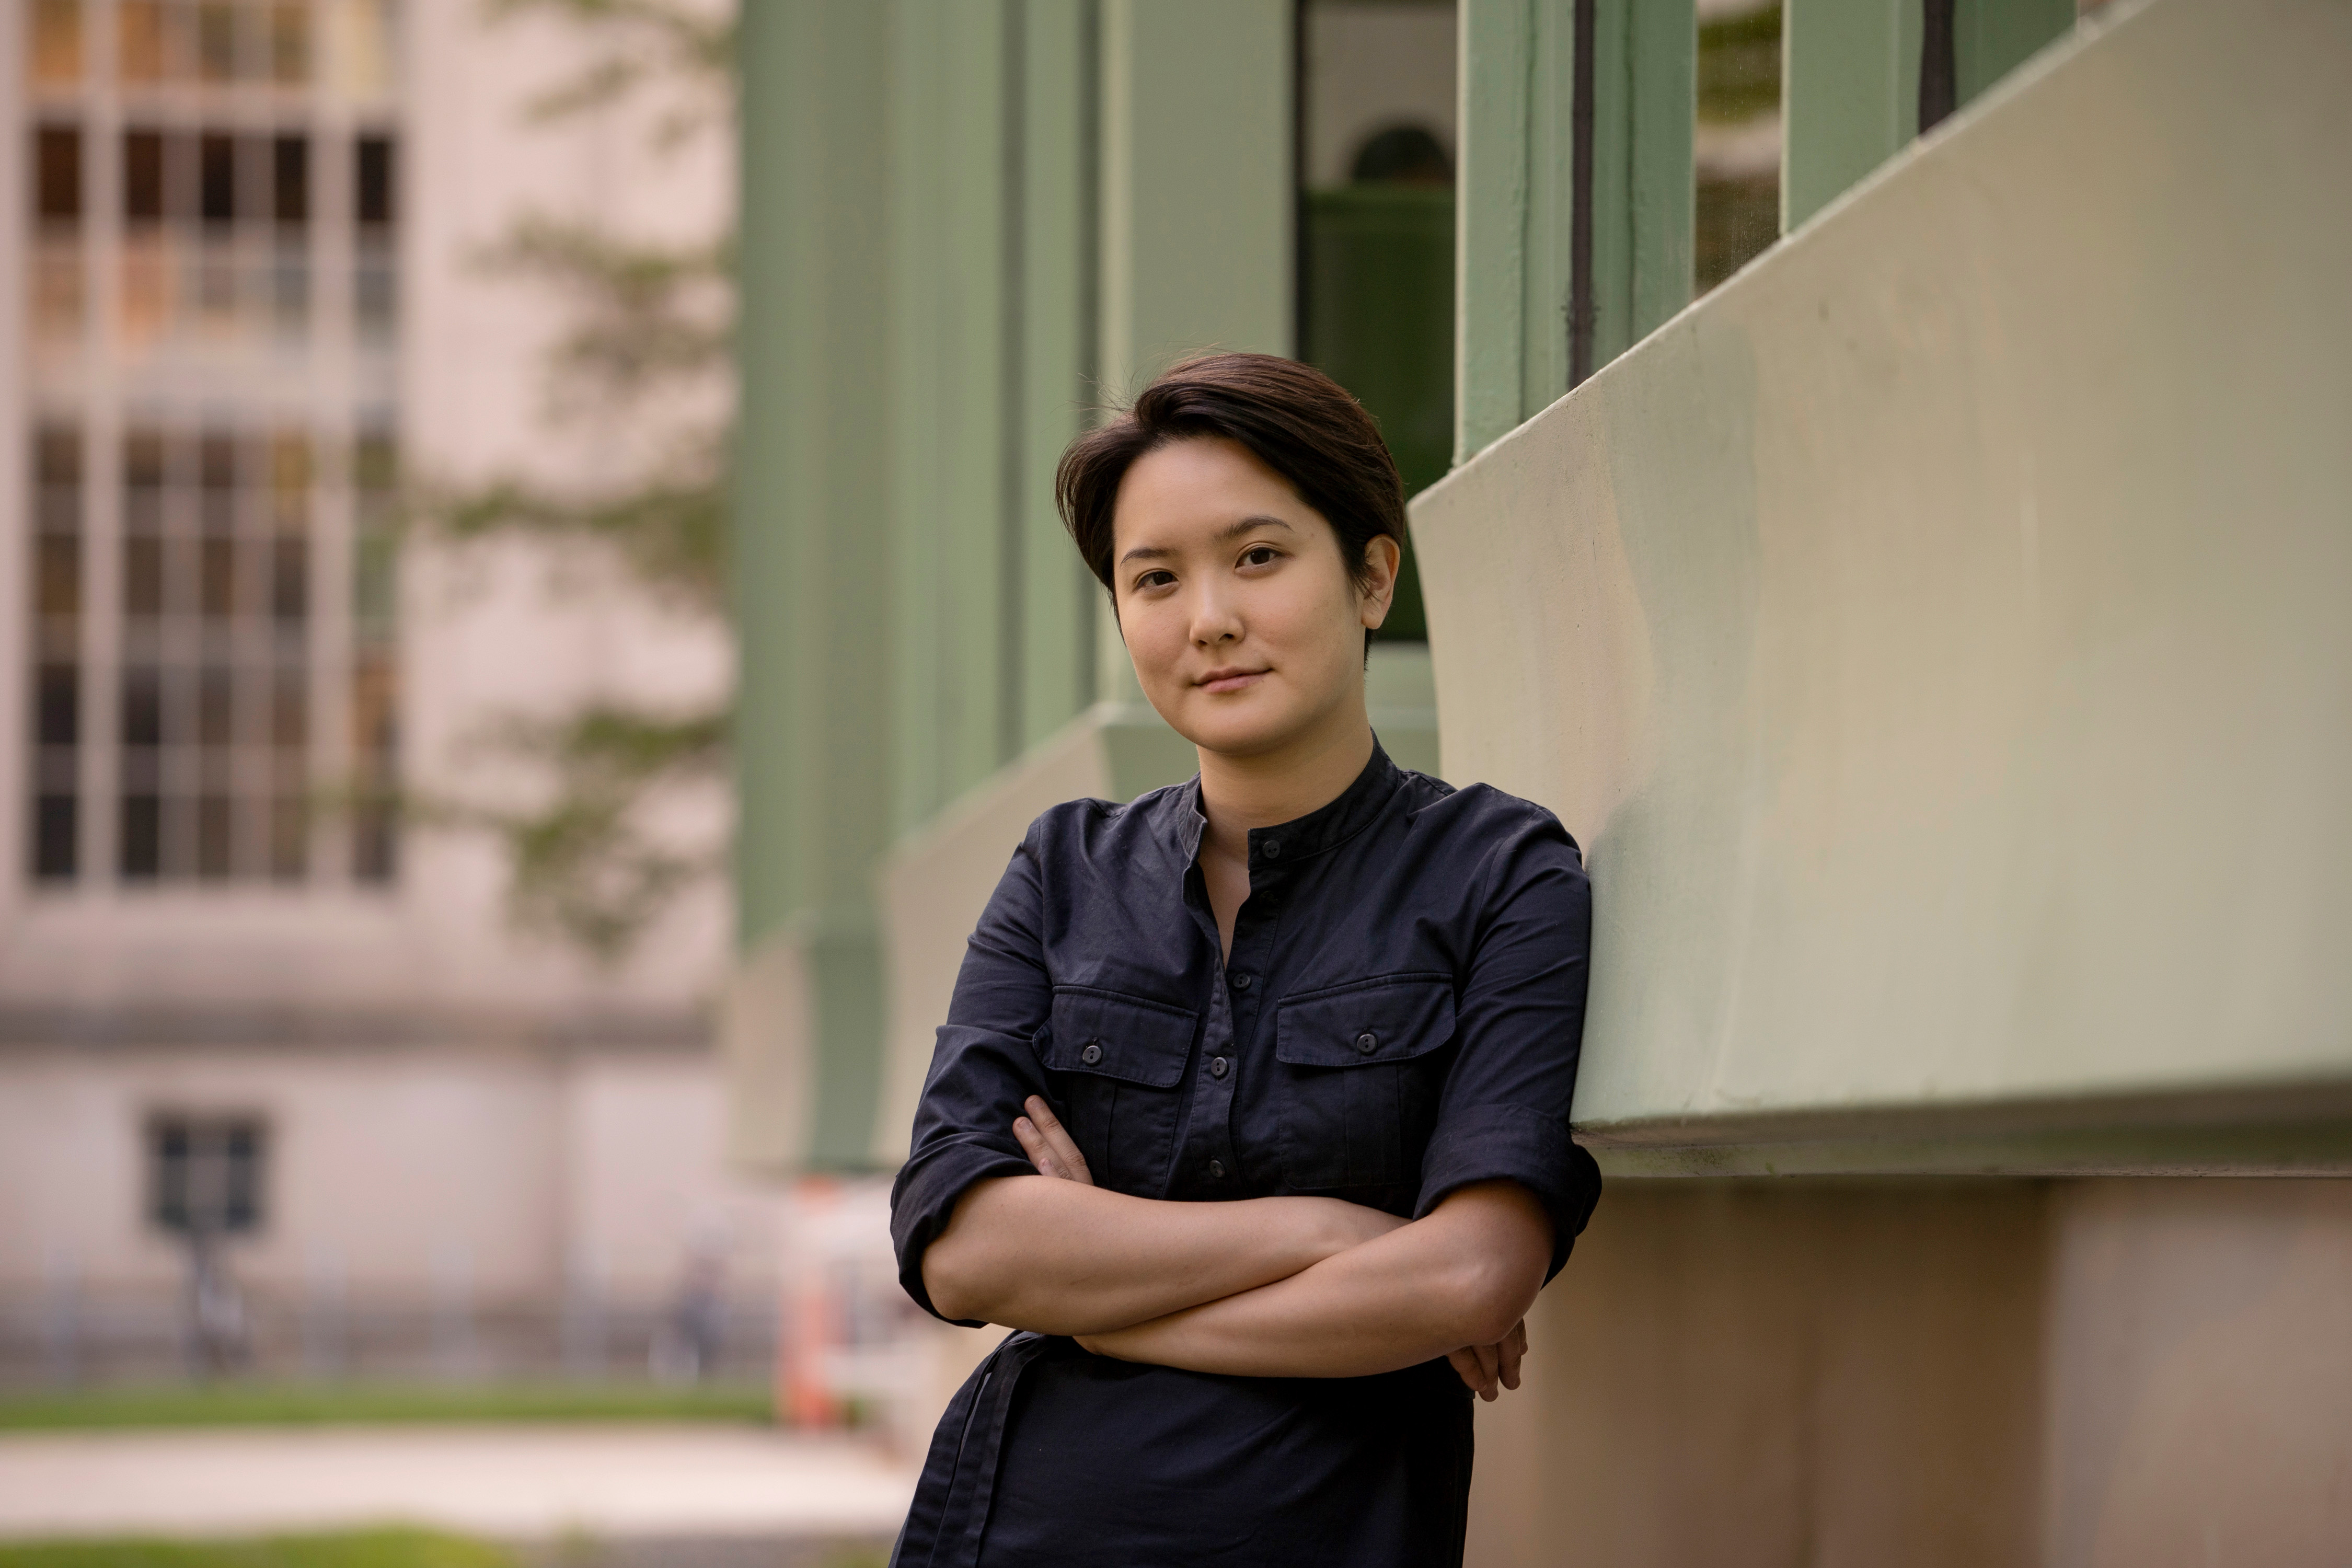 As a teenager, Jamie Wong was a professional pop songwriter. Now, she’s an anthropologist studying venture capitalism in China.